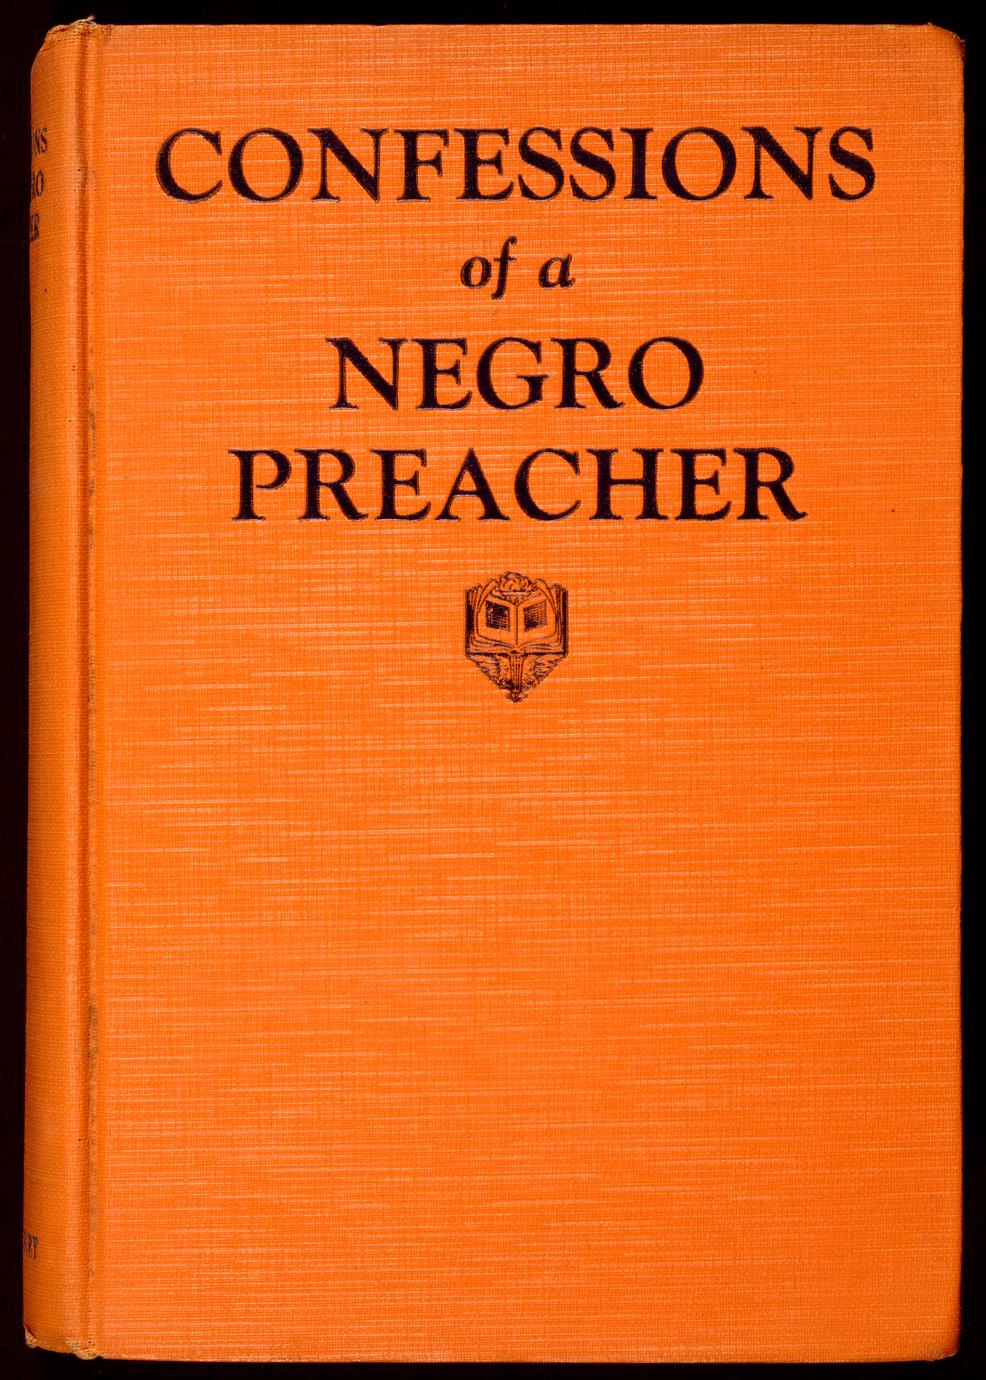 Confessions of a negro preacher (1 of 3)